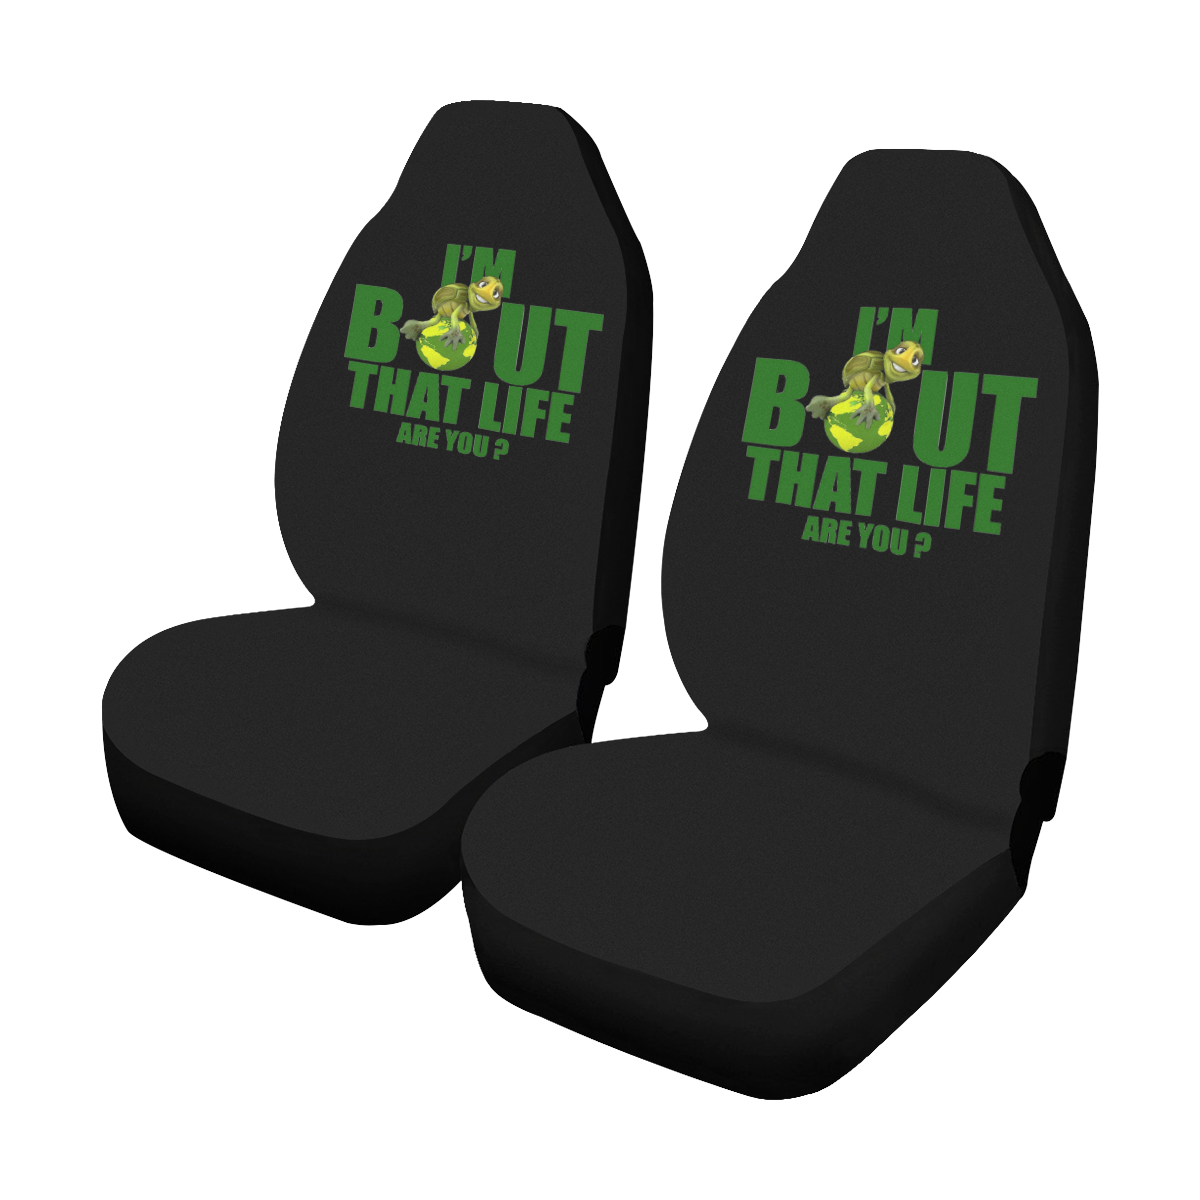 bout that life Car Seat Covers (Set of 2)